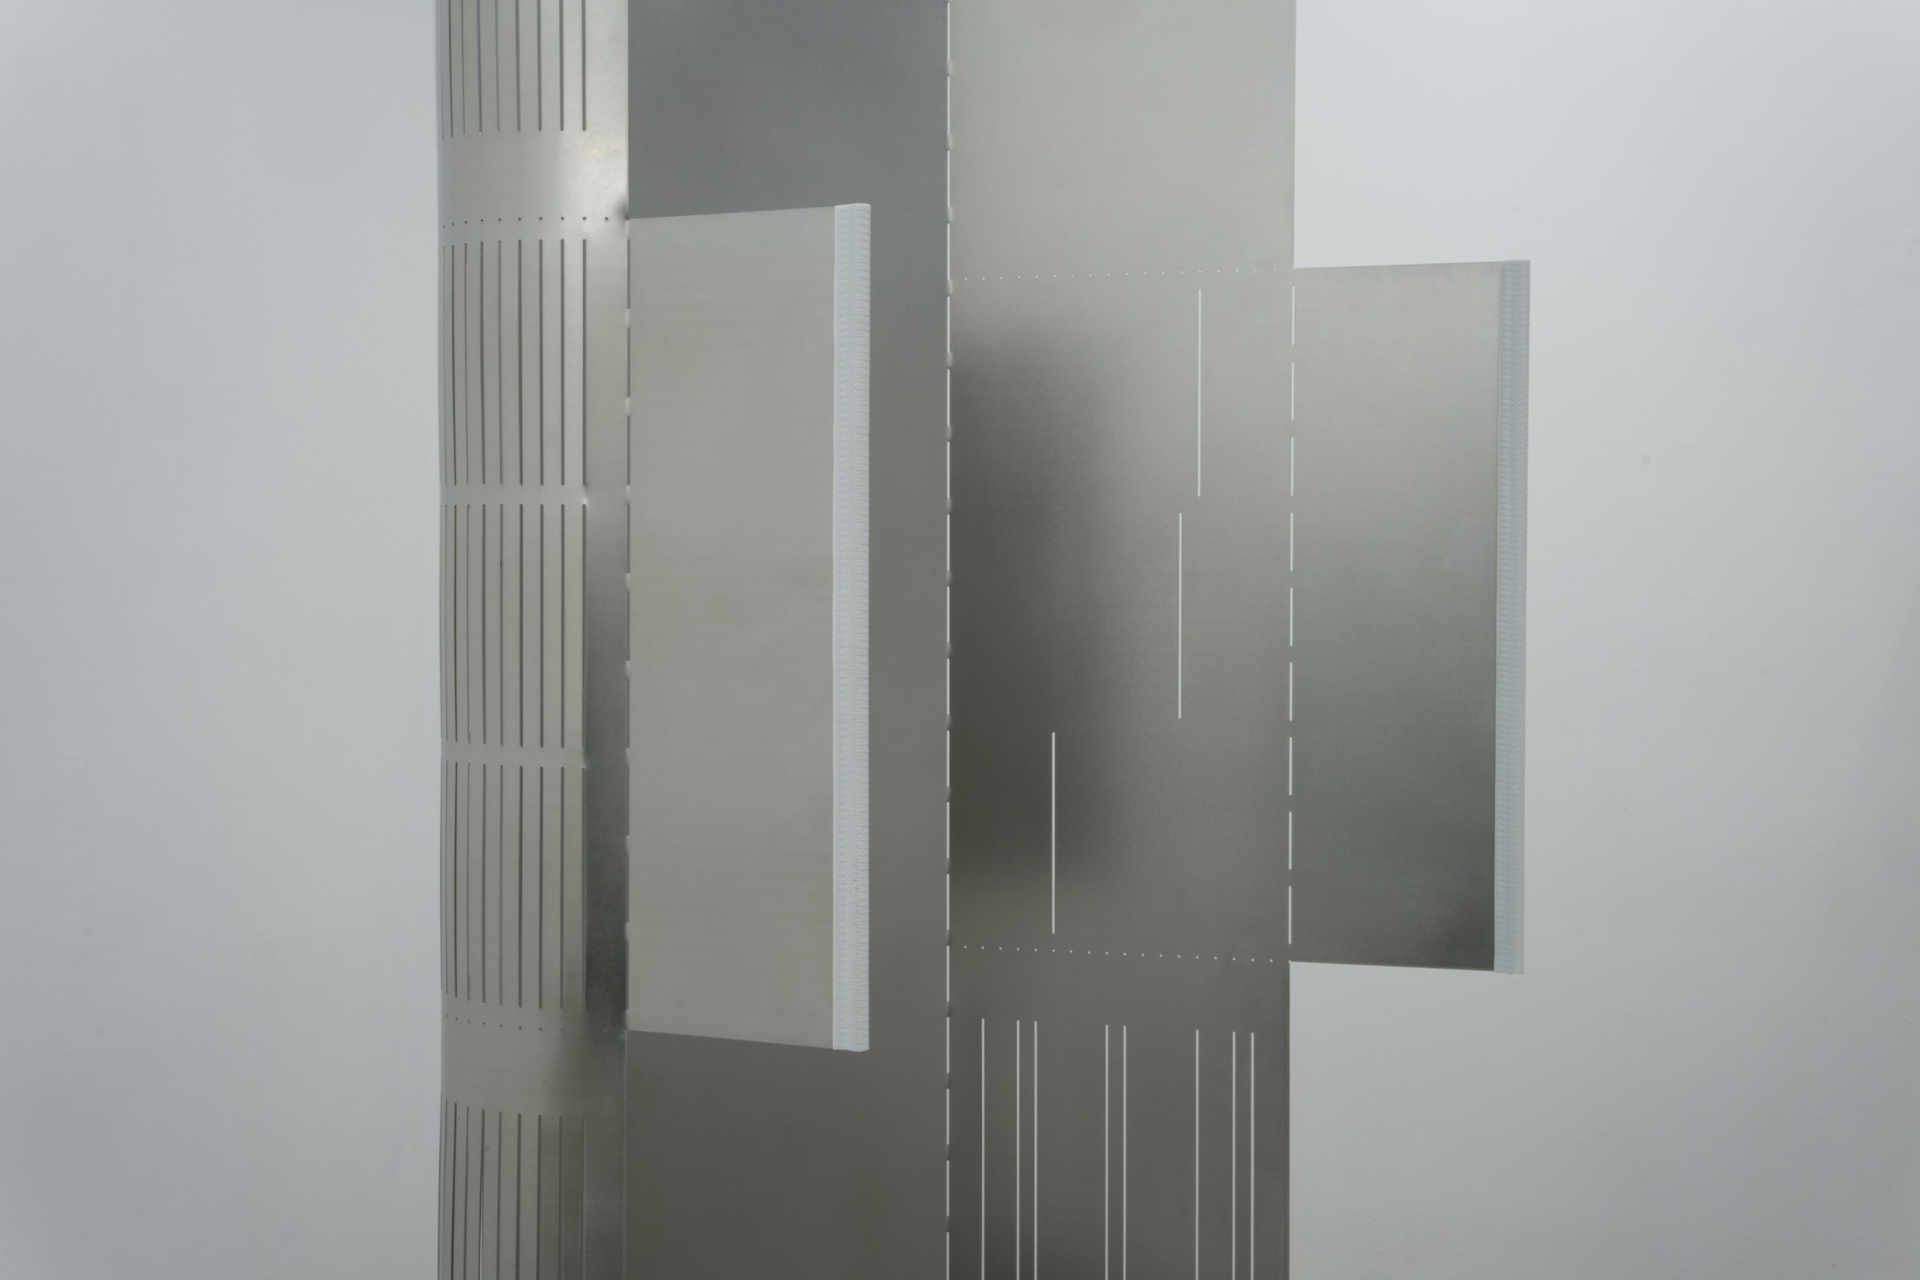 Marina Stanimirovic, ARCHITECTURE DU SILENCE LH01, 2021, 204 x 50 x 16 cm, 1mm stainless steel, silicone rubber